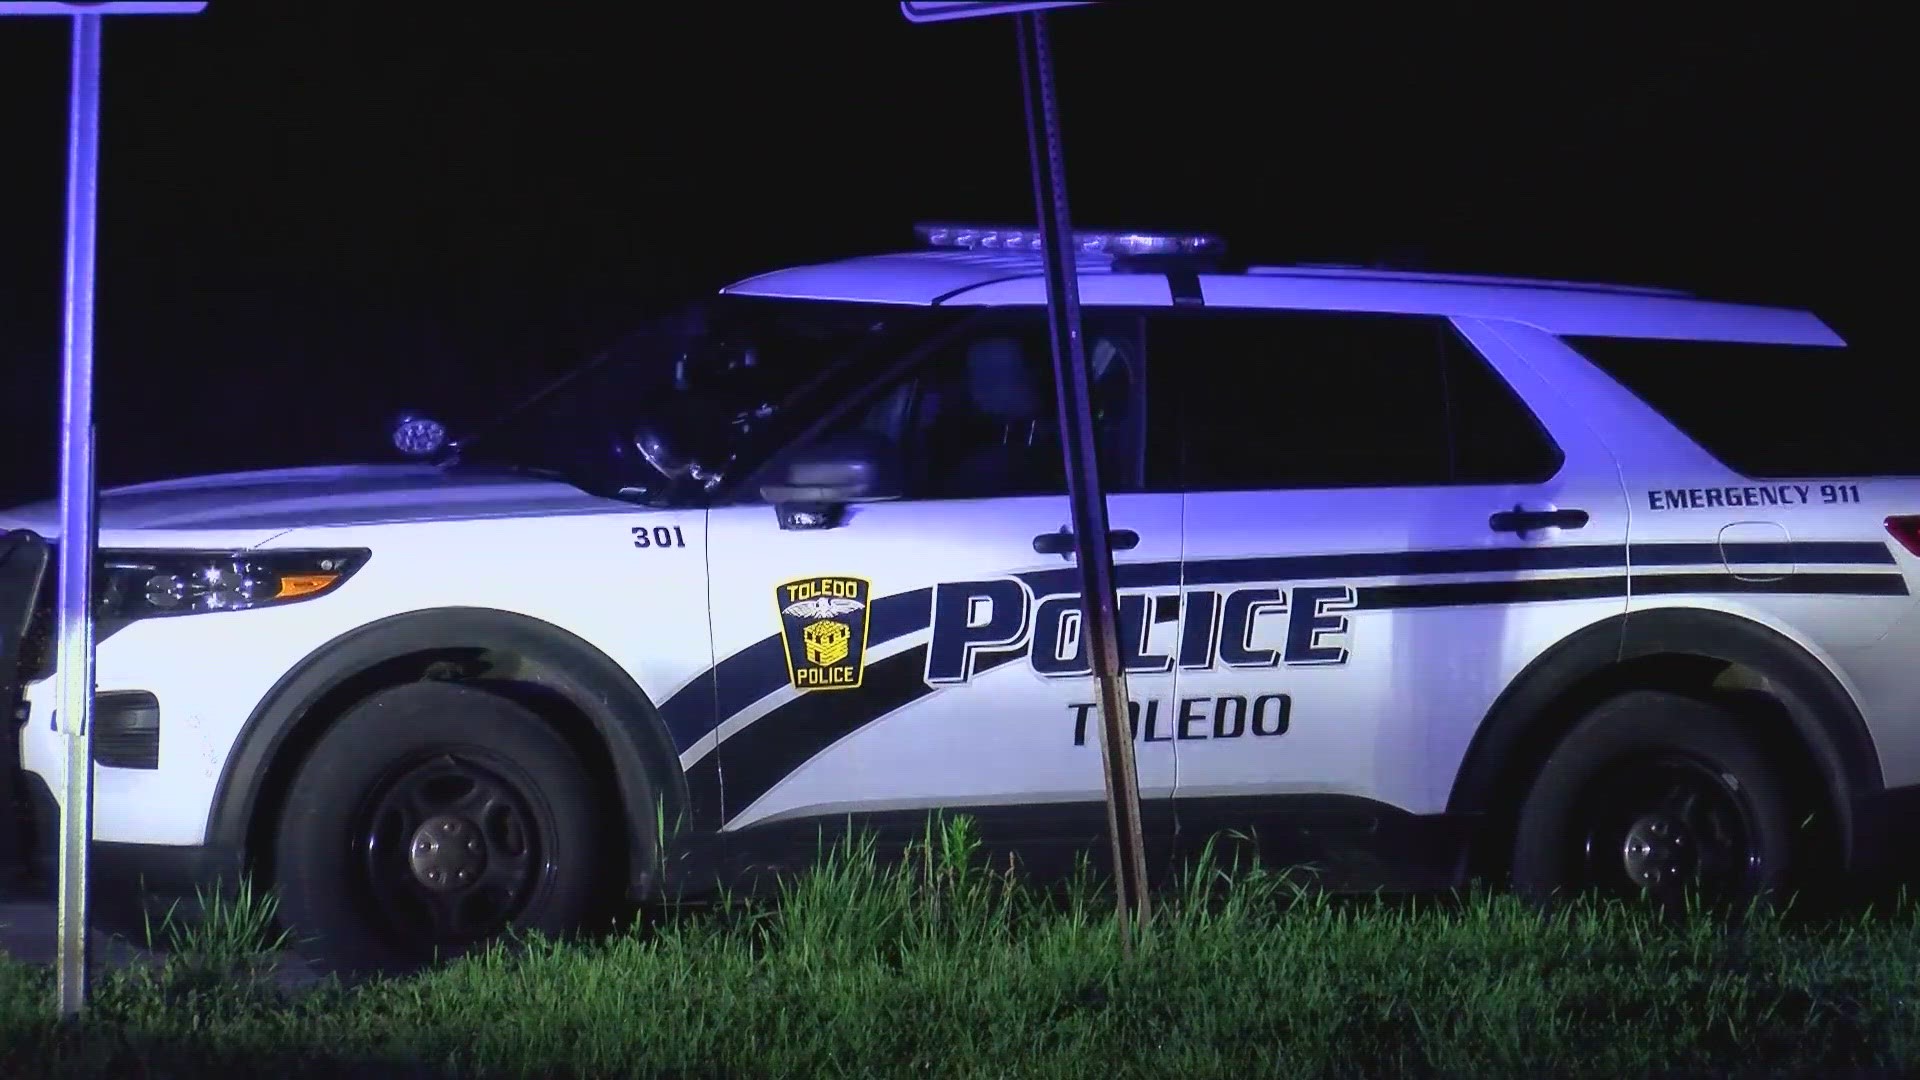 Toledo police say the vehicle who hit the motorcycle has a damaged left front headlight.